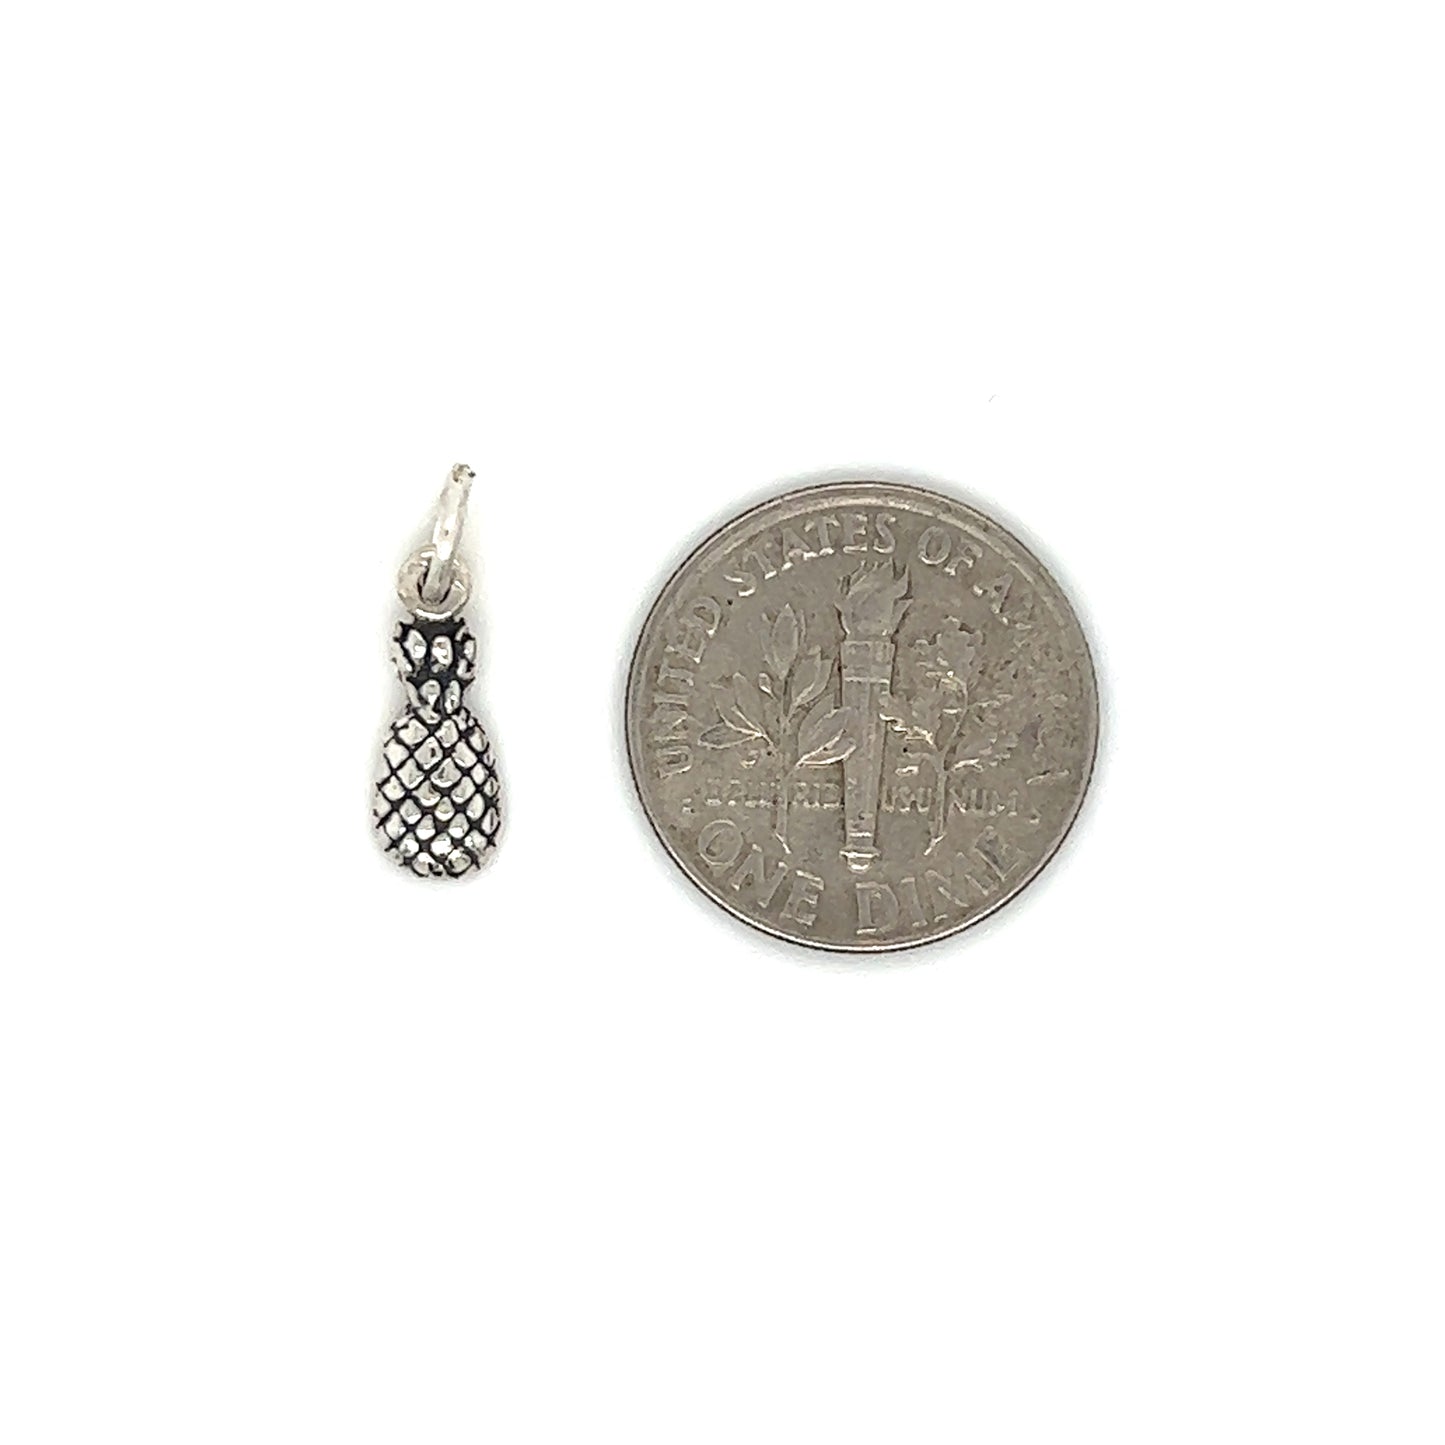 A Super Silver silver coin next to a Tiny Pineapple Charm.